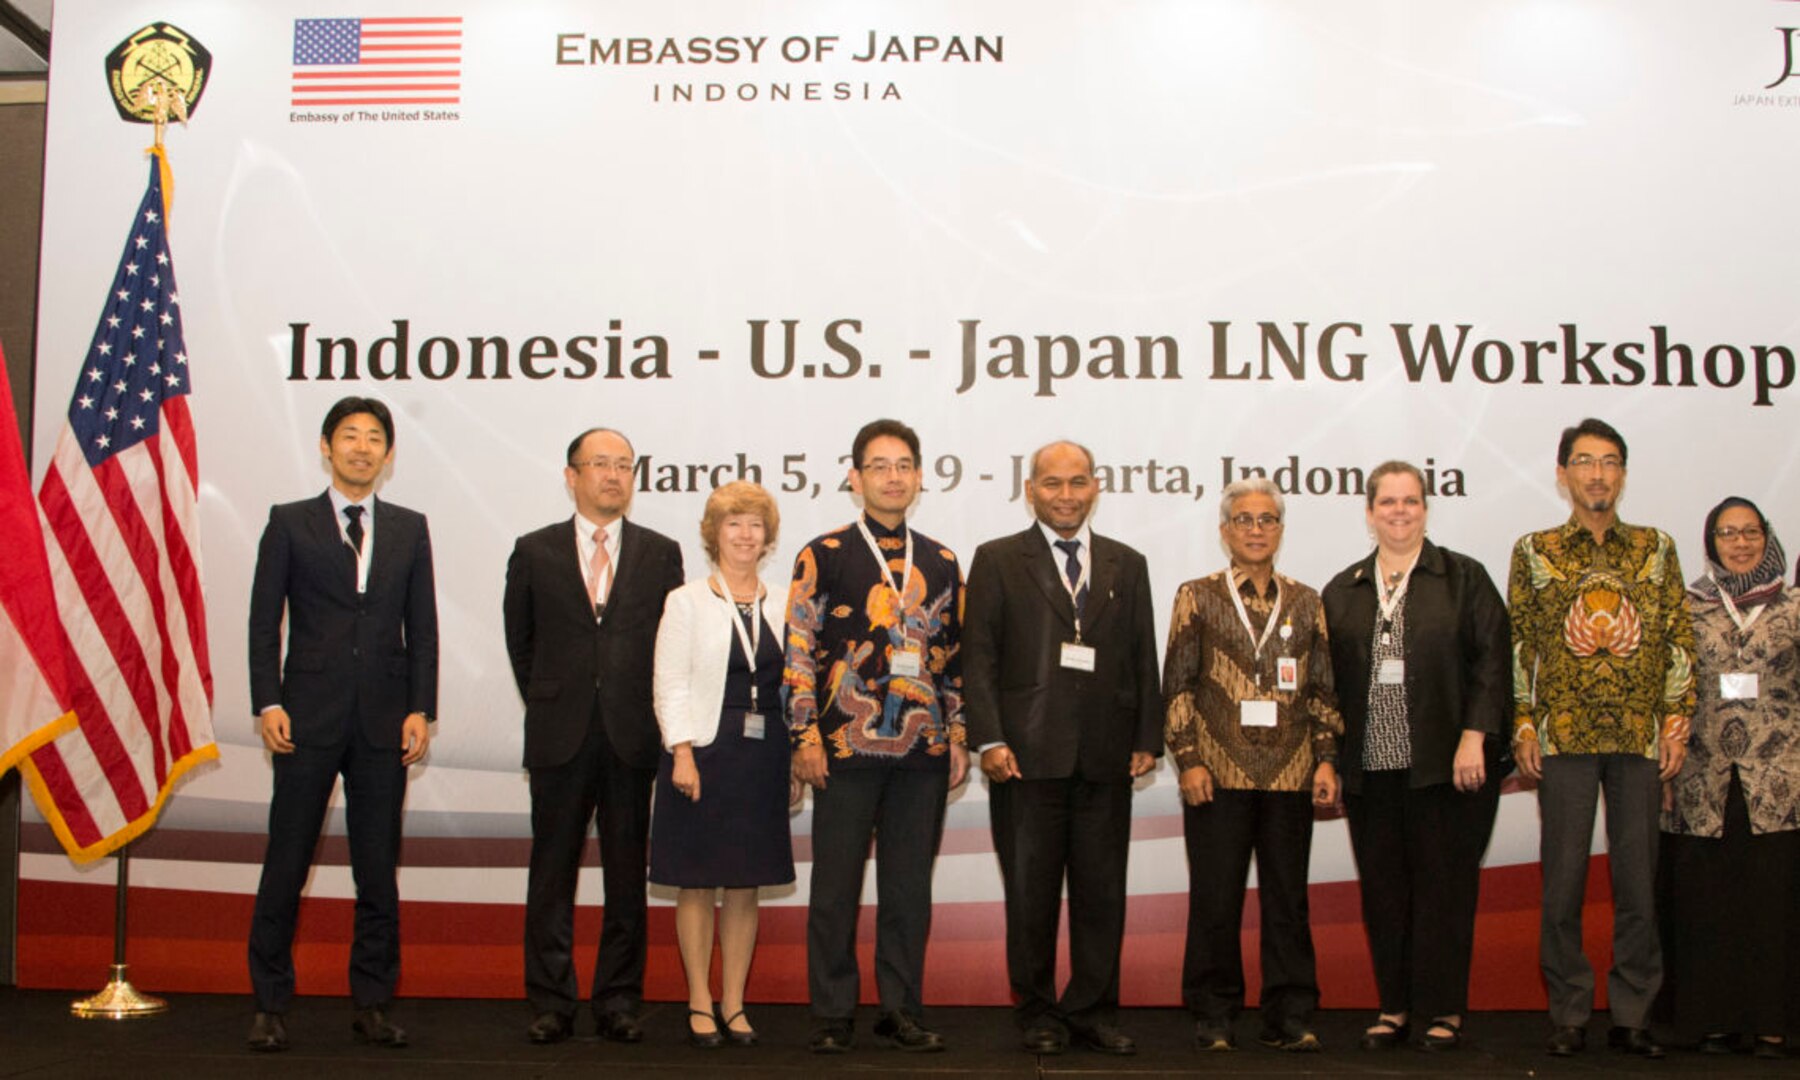 Indonesia-U.S.-Japan LNG Workshop Promotes Energy Partnerships in a Free and Open Indo-Pacific